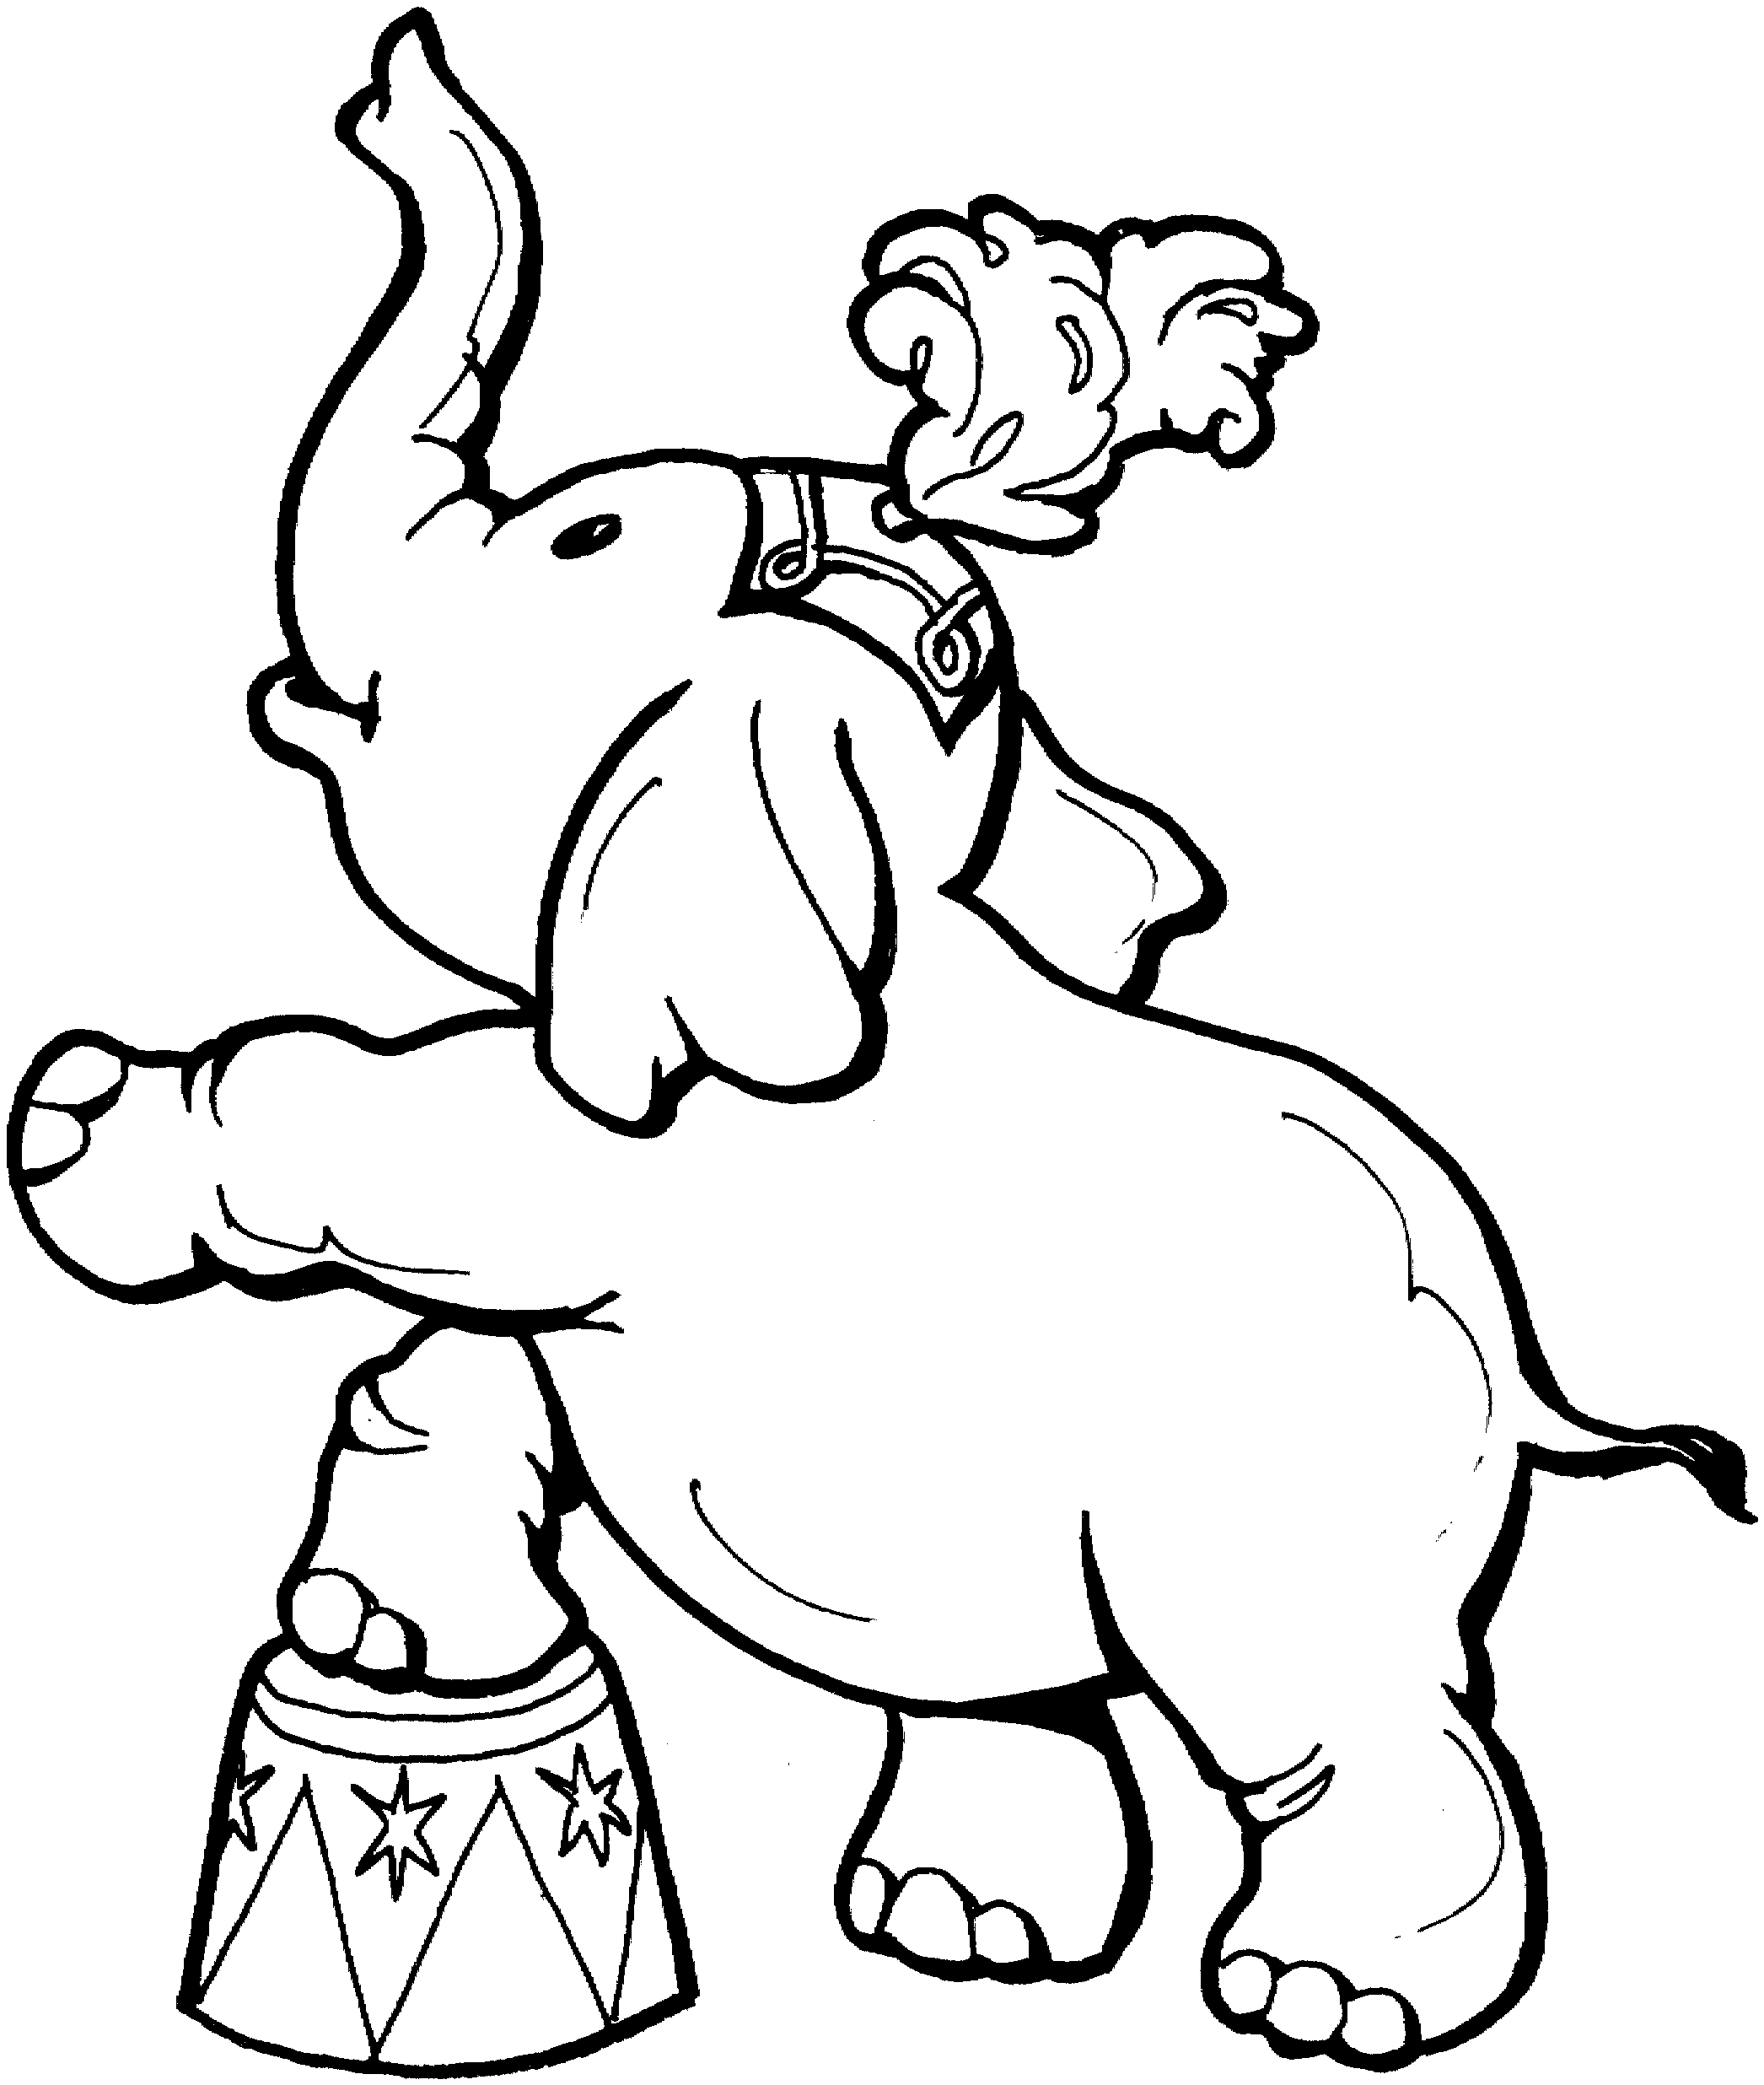 elephant coloring sheet baby elephant coloring pages to download and print for free elephant coloring sheet 